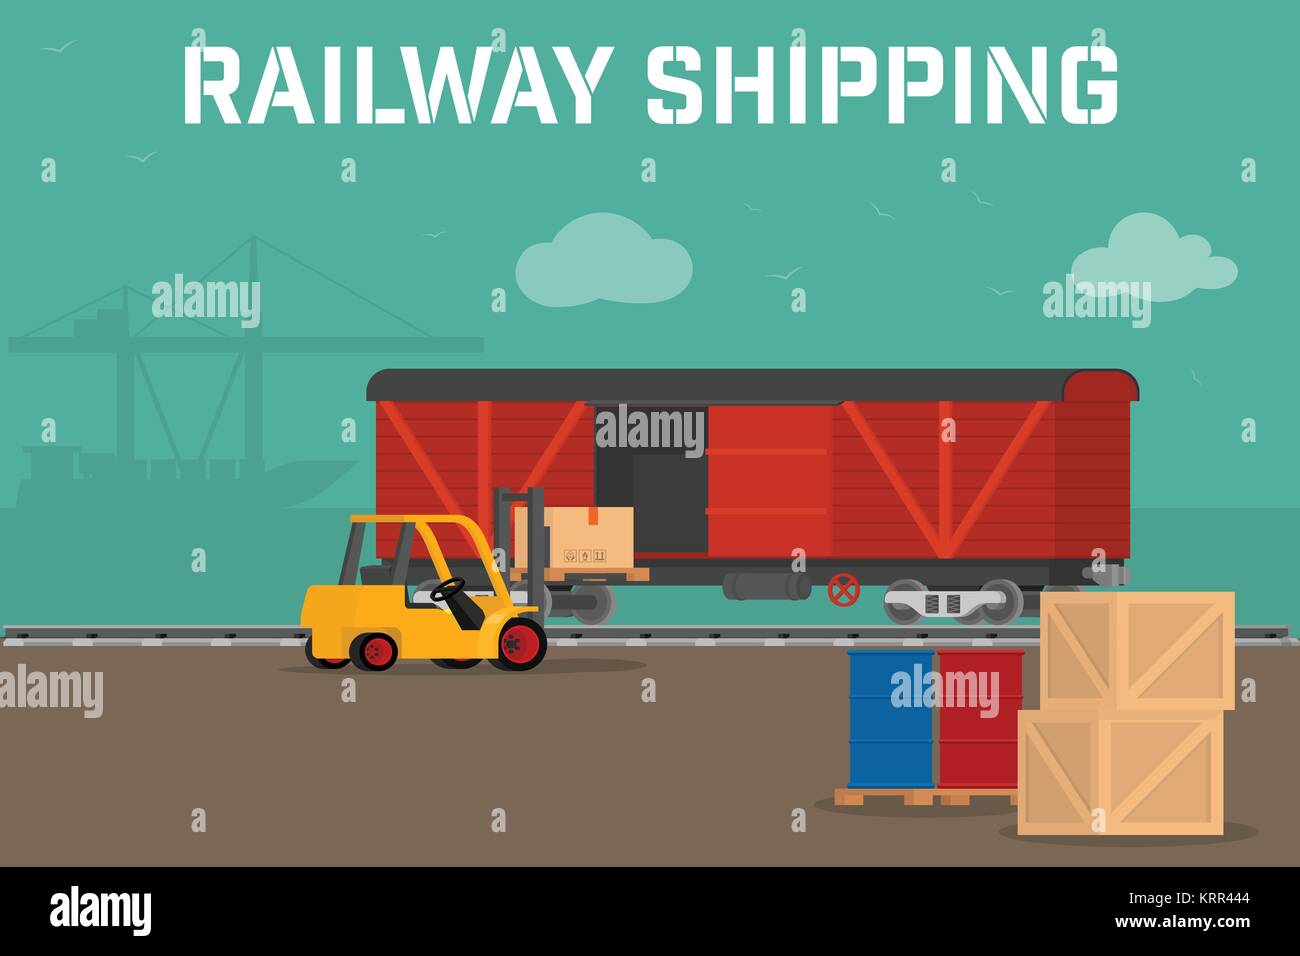 Railway logistic concept transport delivery service. Cargo transportation by train. Workers loading and unloading trucks and rail car with forklifts.  Stock Vector